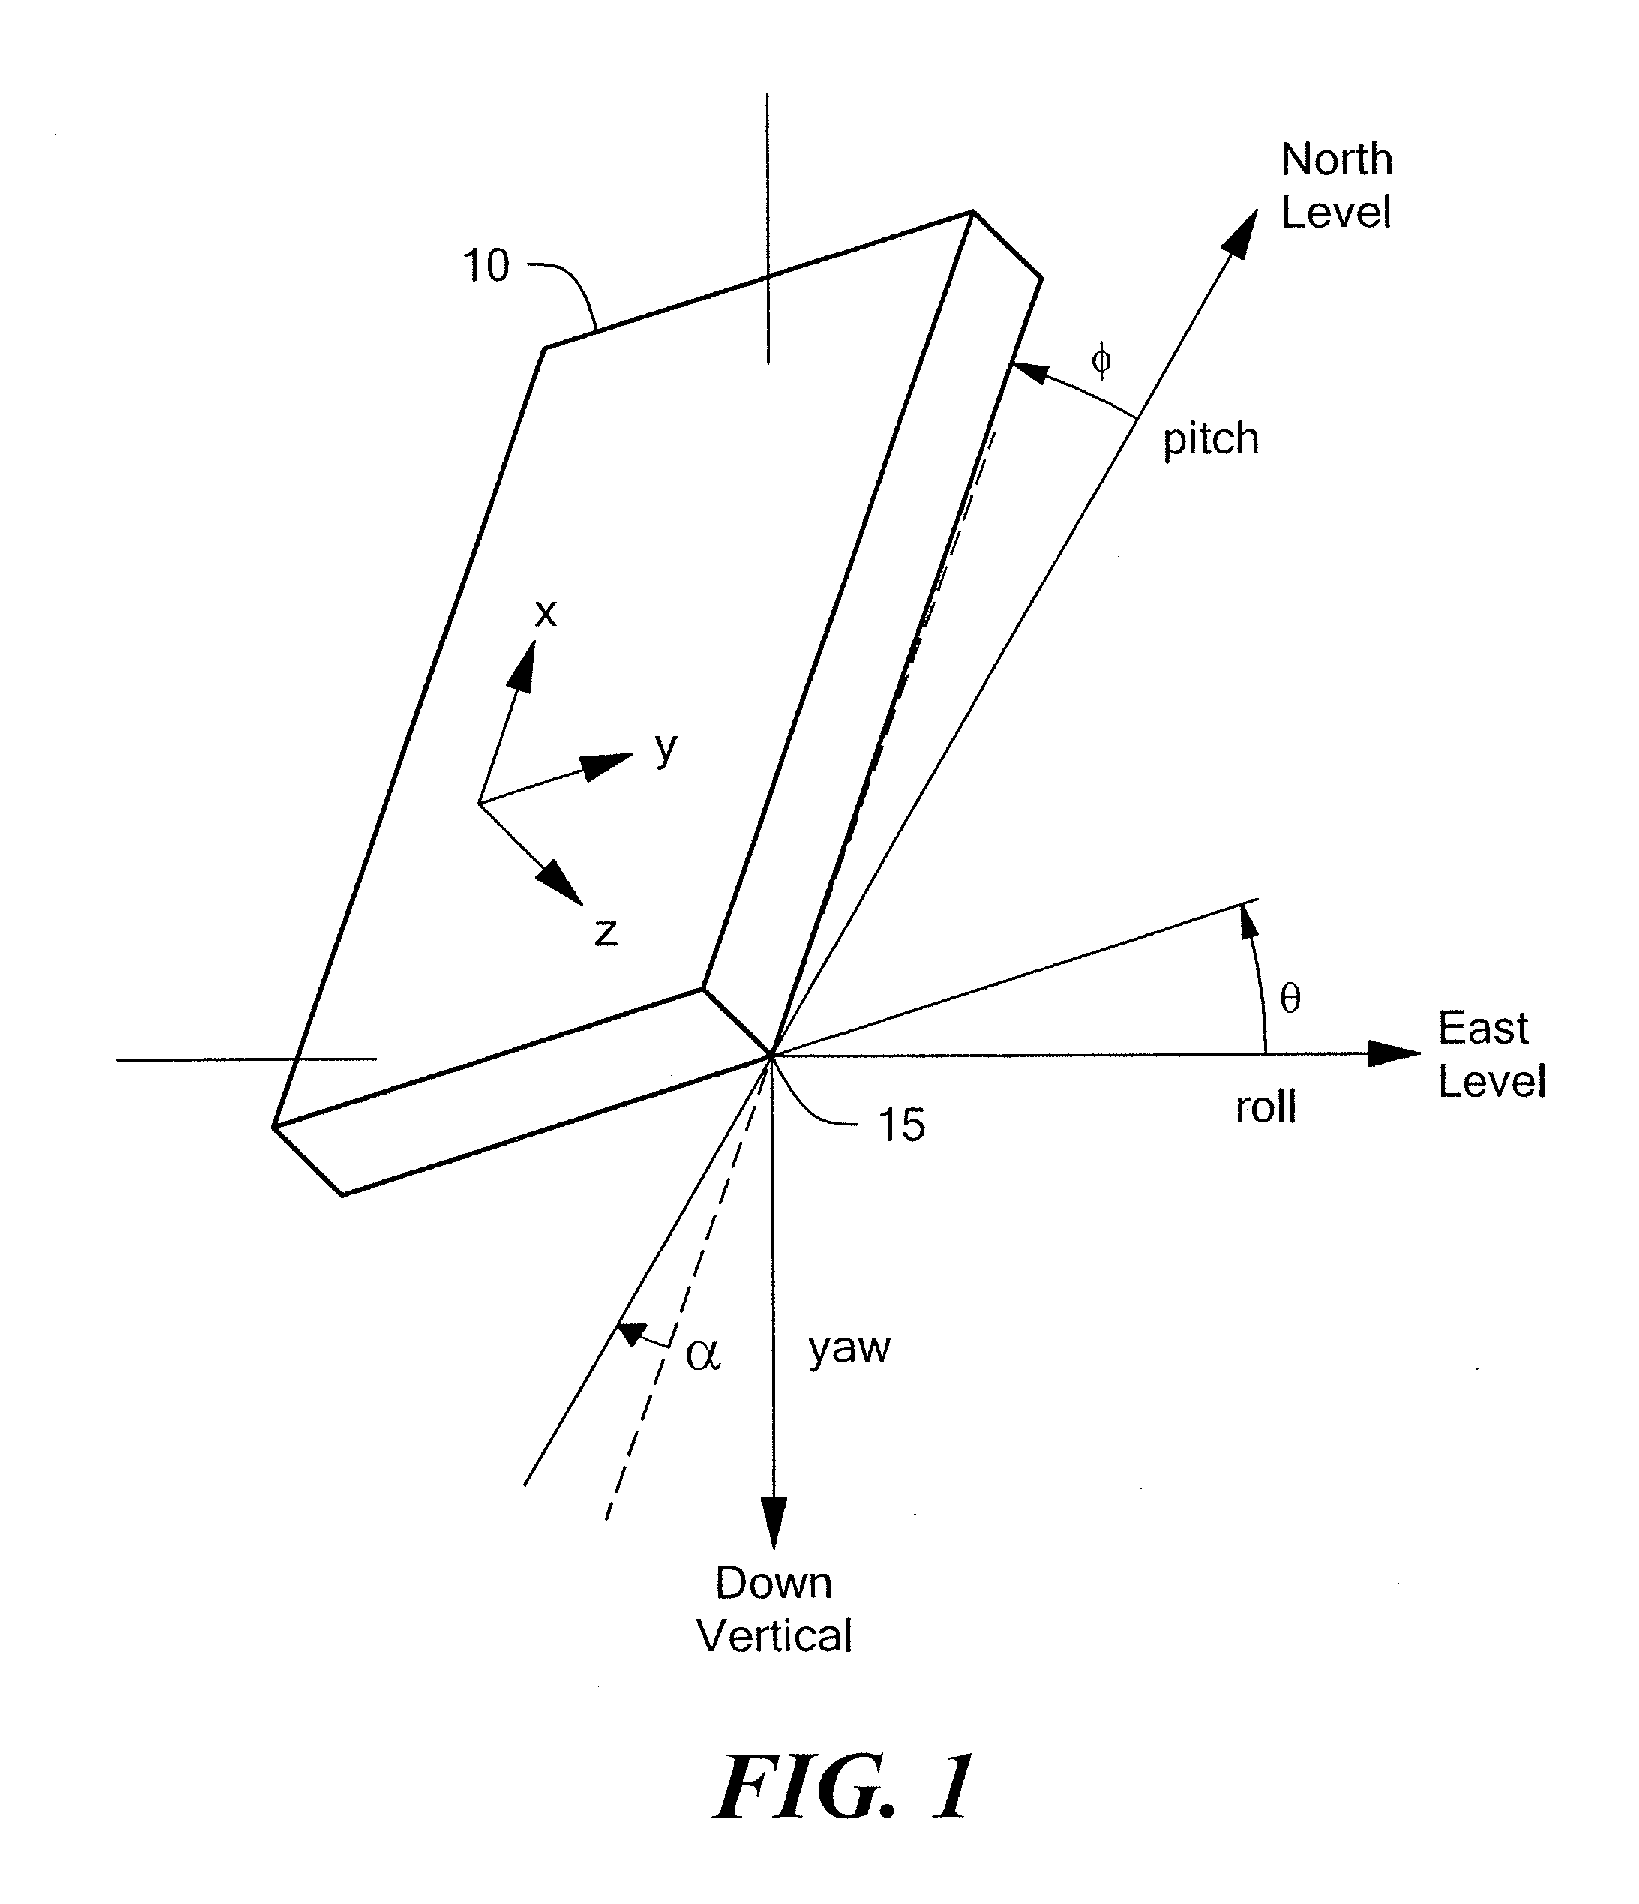 System and method of sensing attitude and angular rate using a magnetic field sensor and accelerometer for portable electronic devices